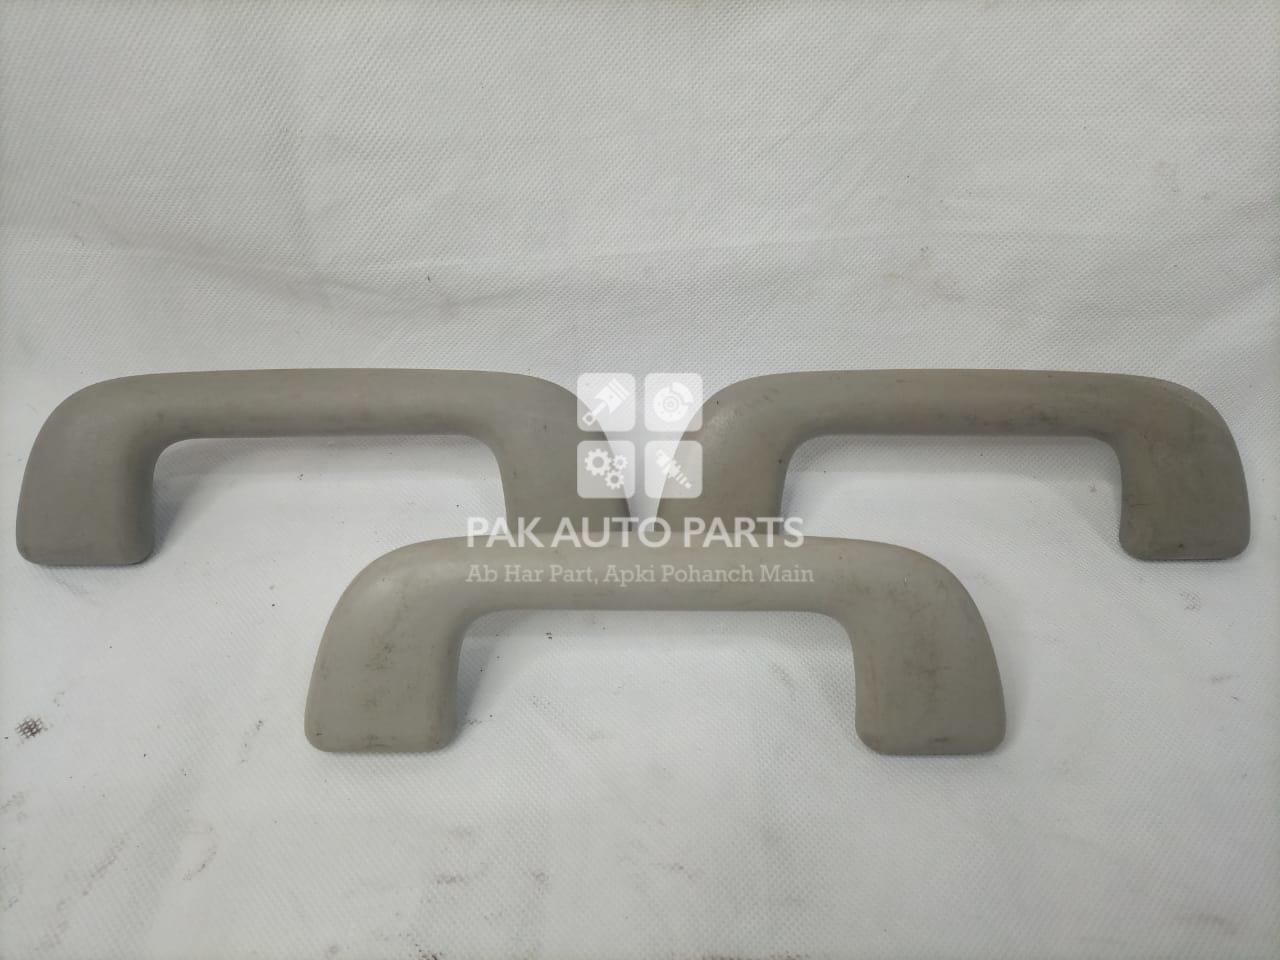 Picture of Toyota Corolla Roof Handle 2006